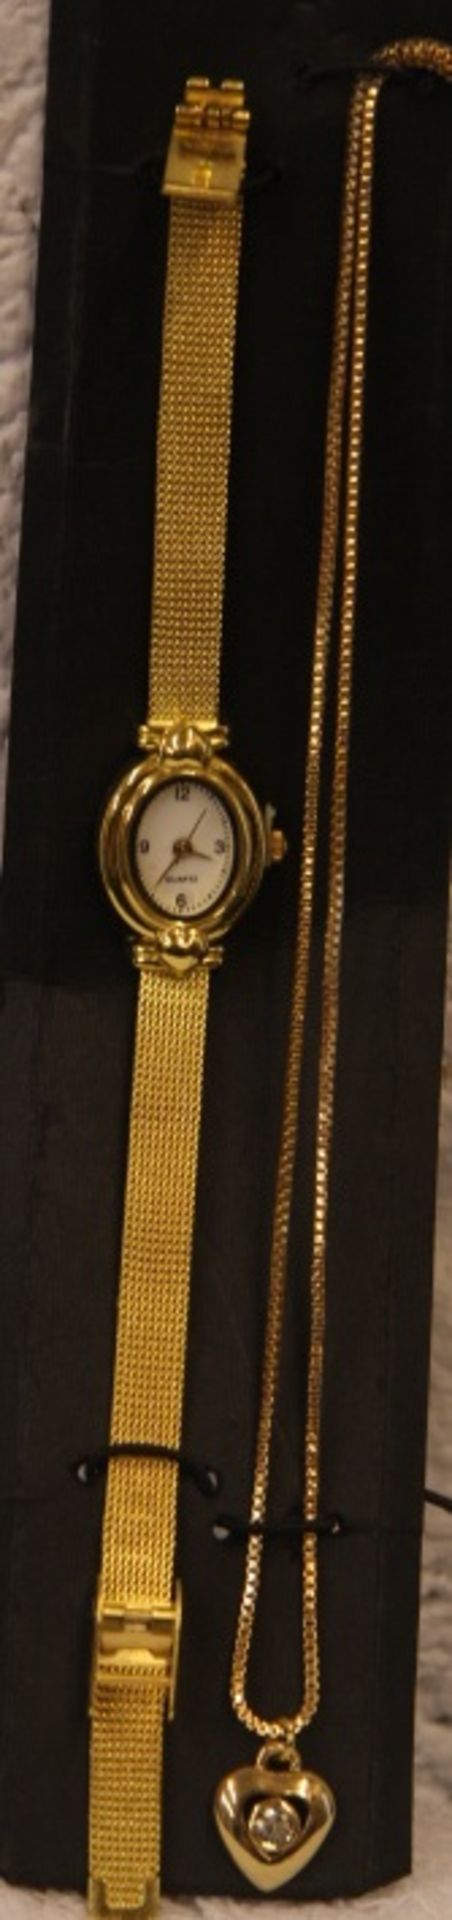 + VAT Grade A Leather WristBand-Ladies Watch & Necklace-Digital Watch - Image 3 of 3